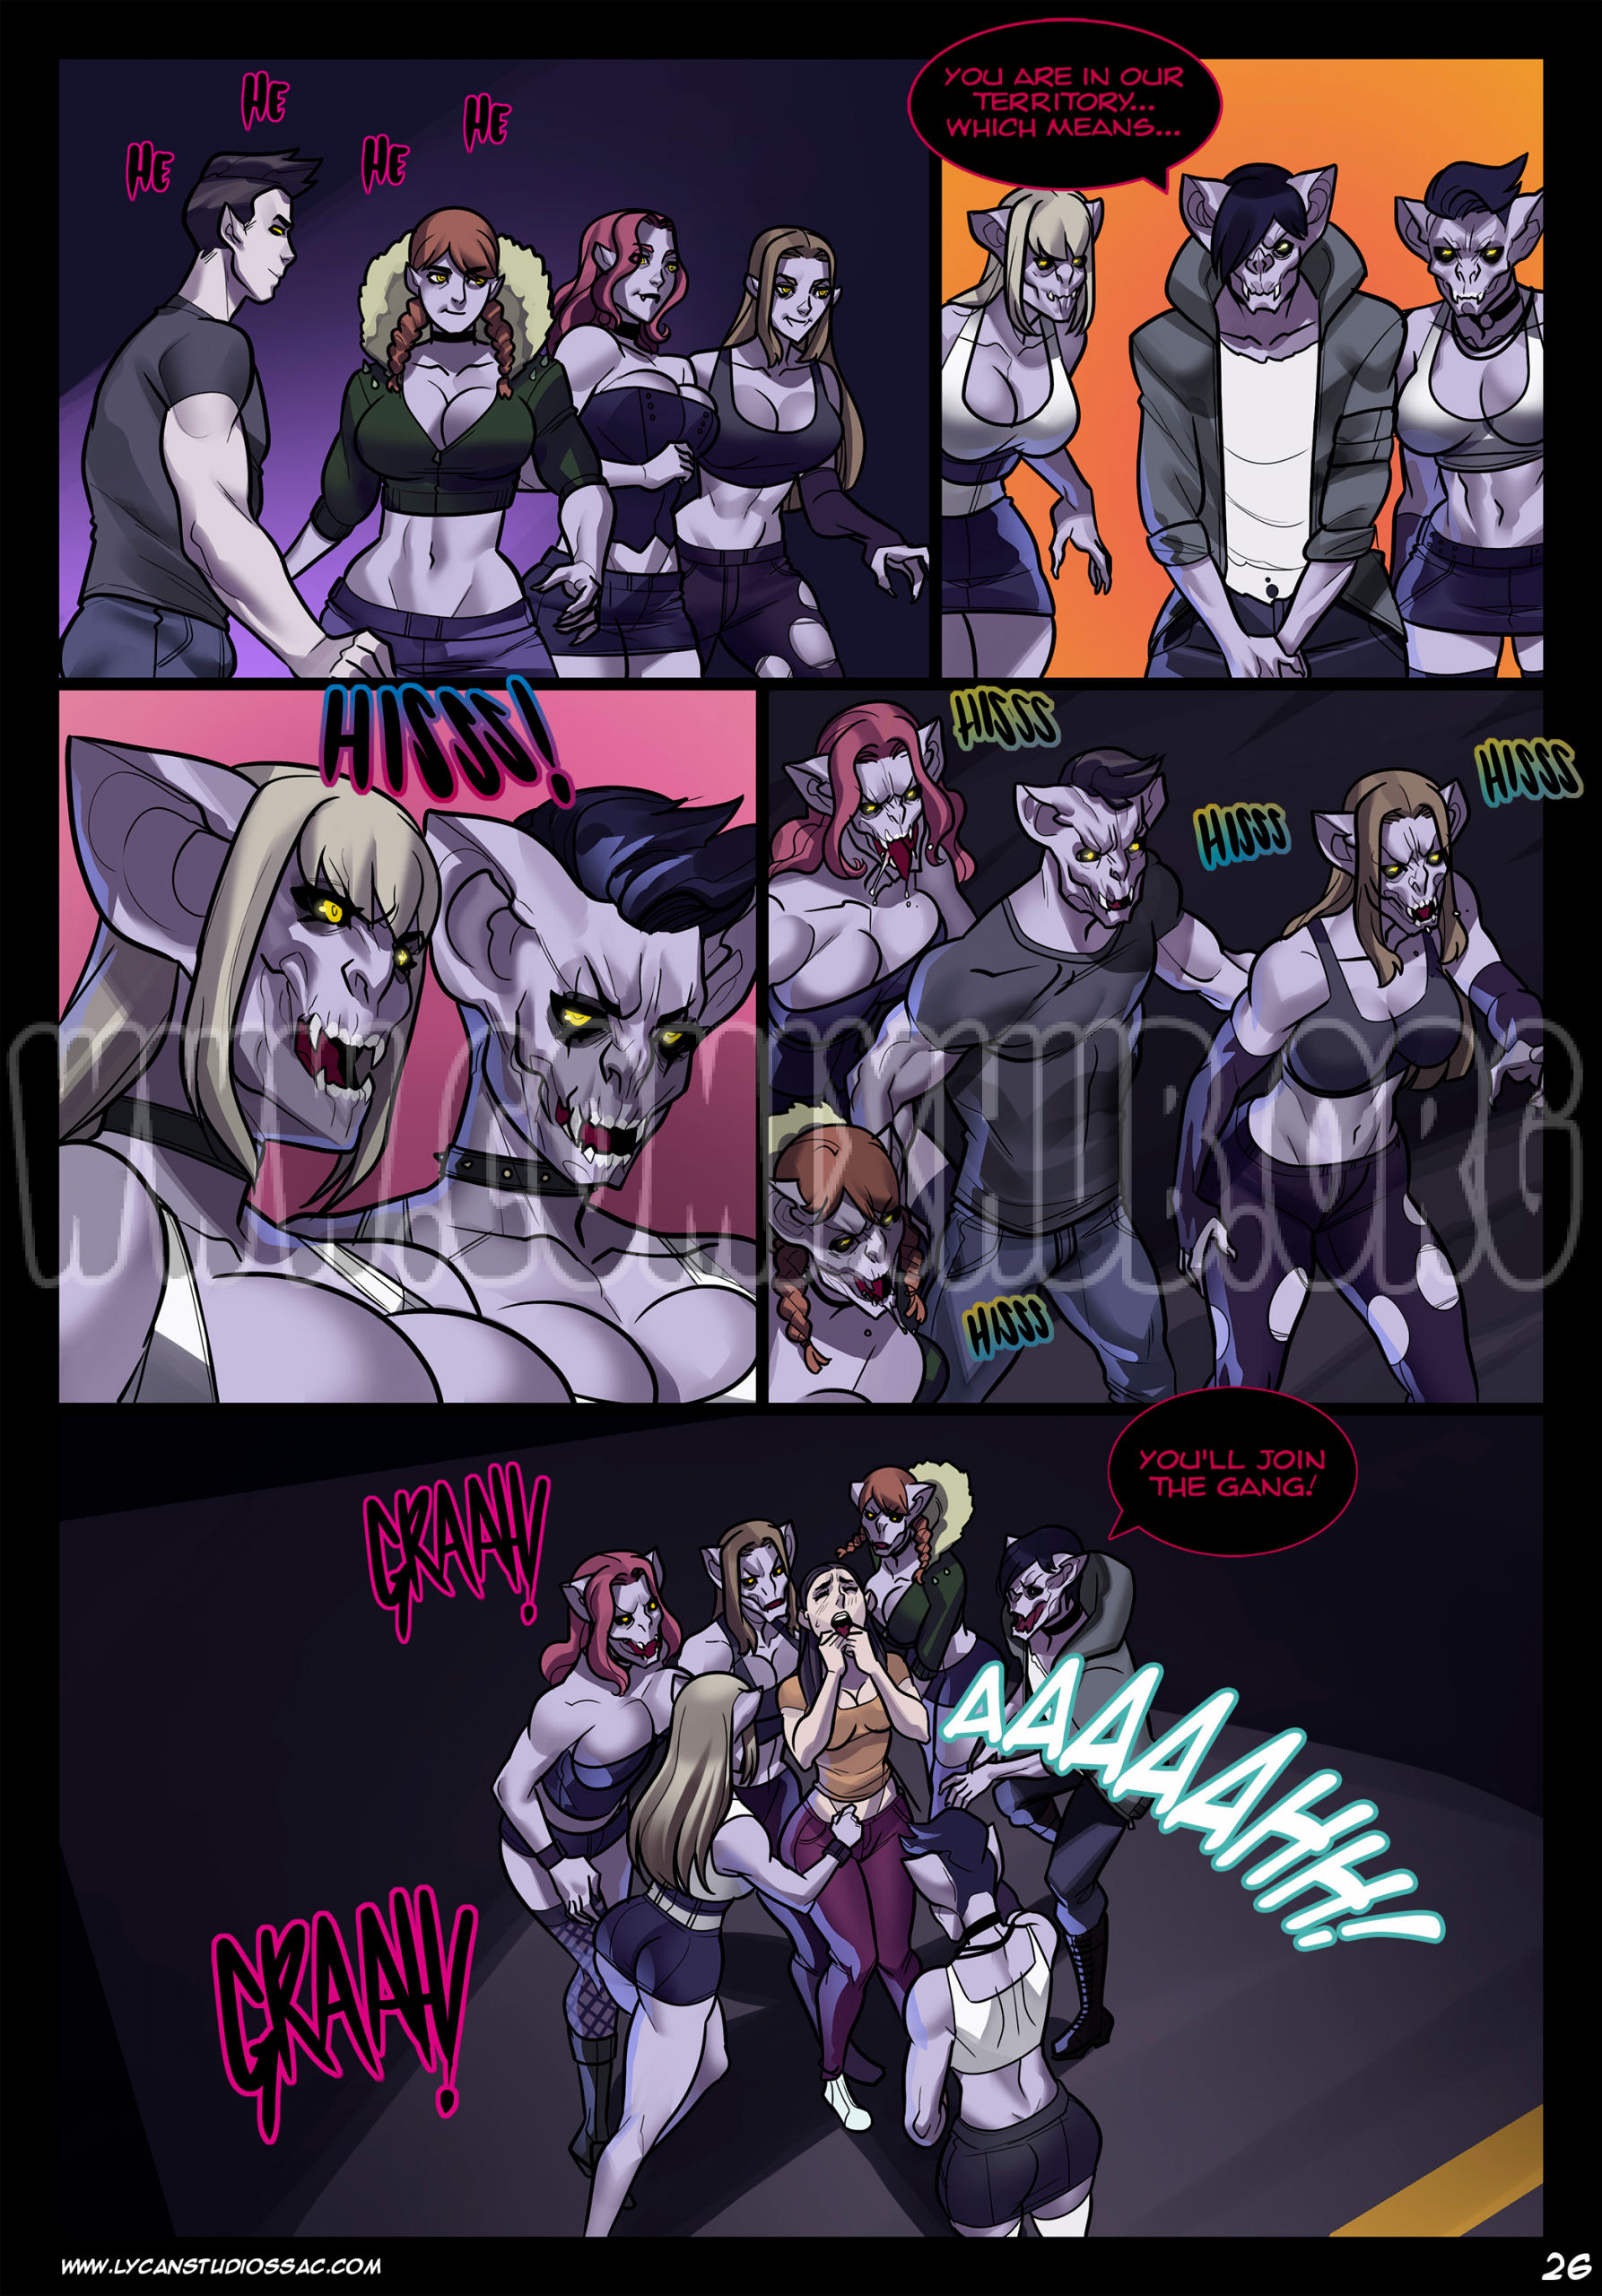 Vampire Rejects 2 Oral sex, cunnilingus, Monster Girls, Straight, Transformation